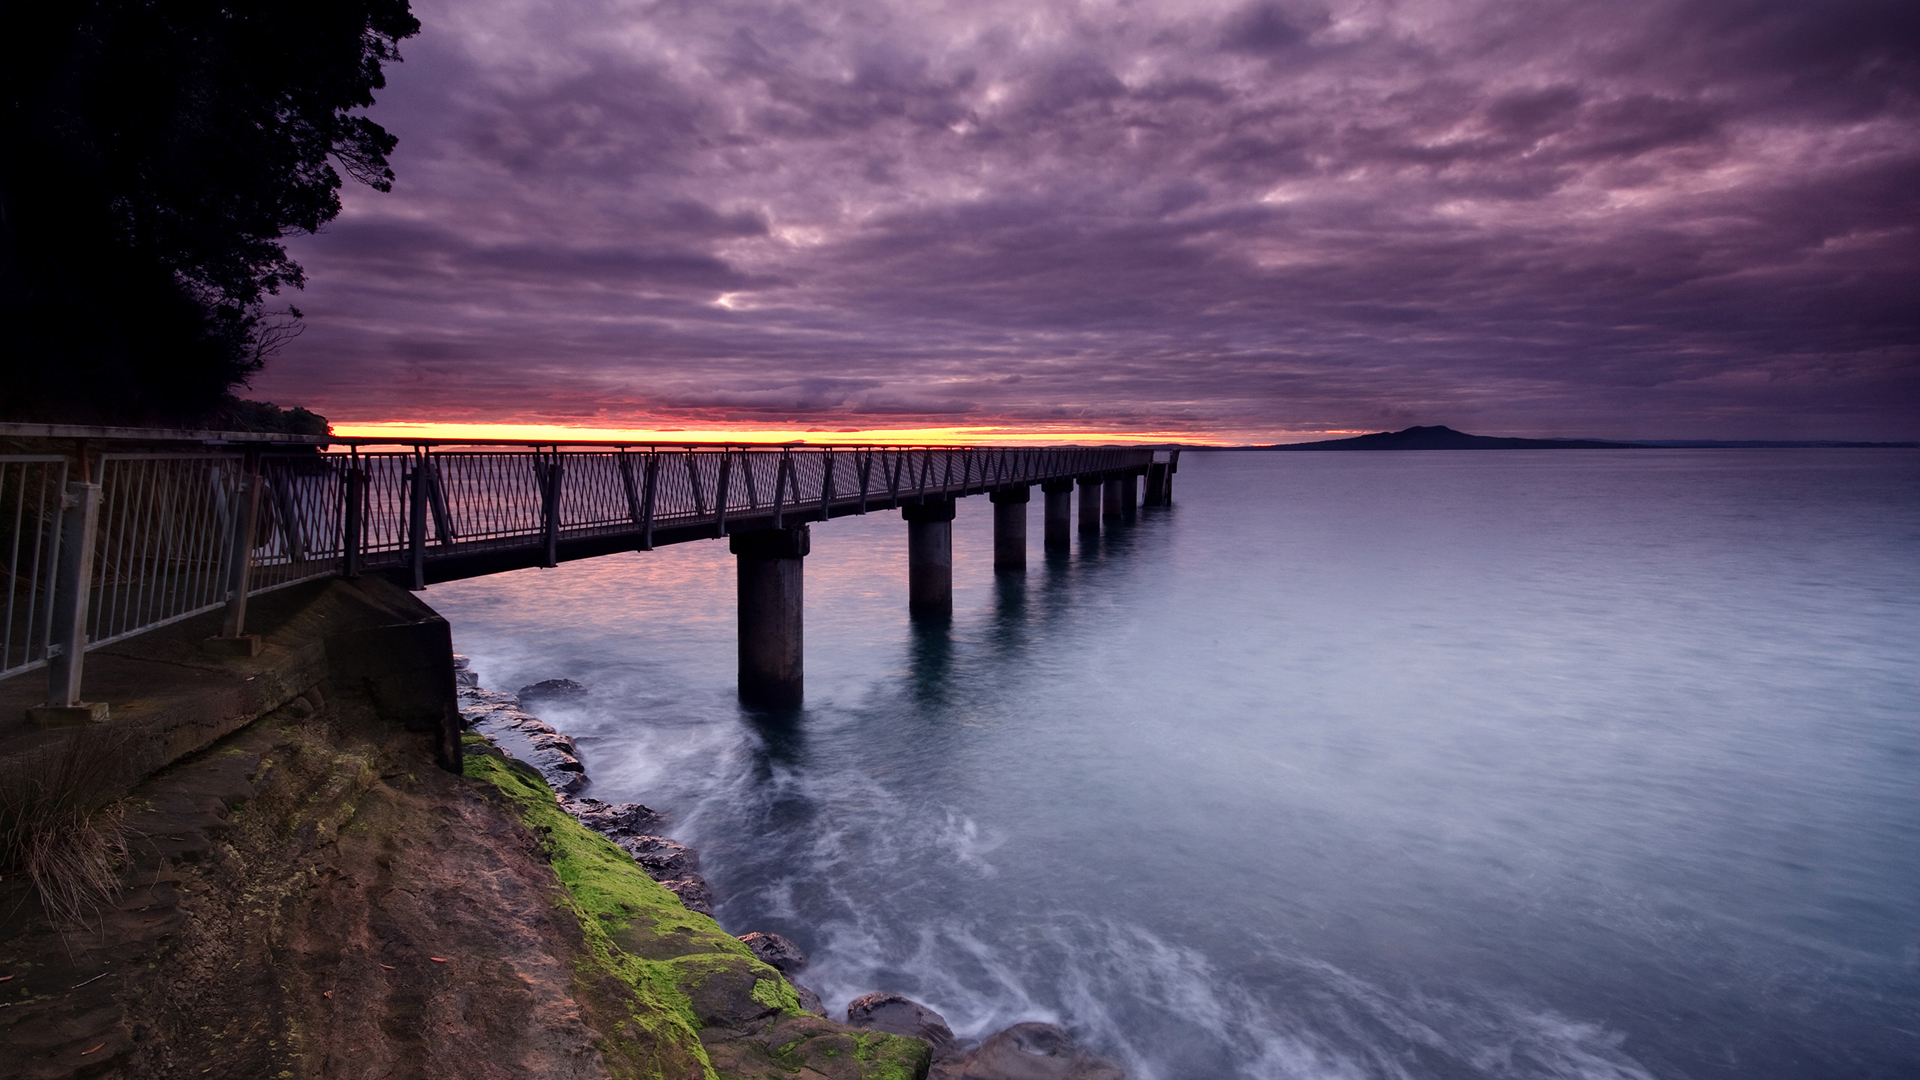 Stunning sunset reflection on a pier over the calm ocean, surrounded by the sky.